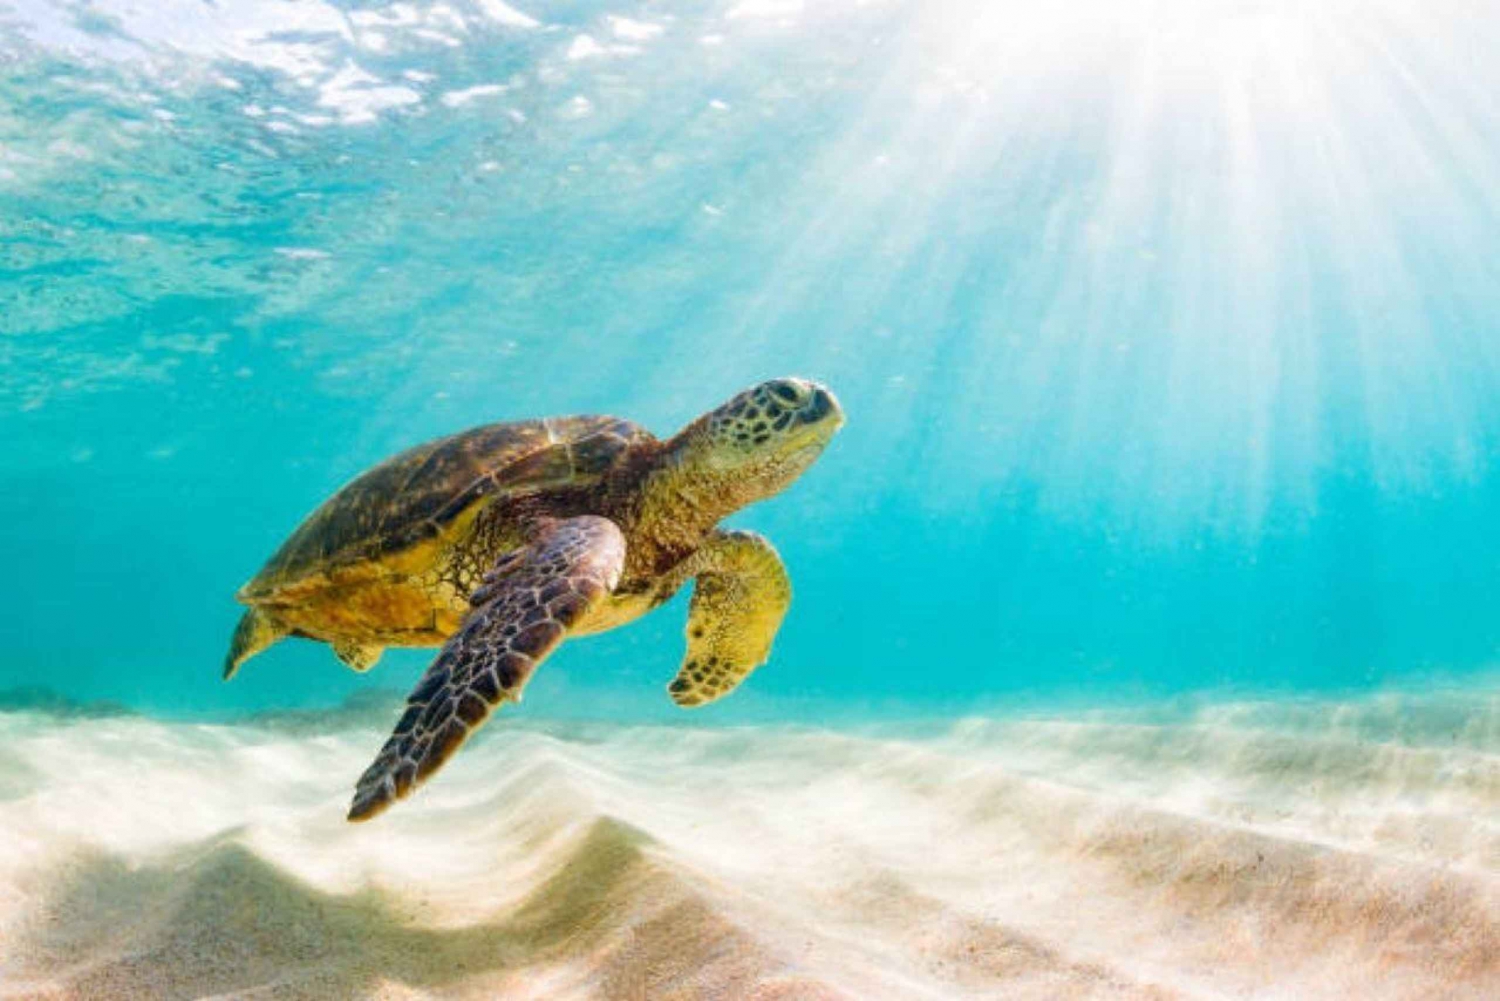 Nassau: 3-Stop Turtle Viewing, Reef Snorkeling Tour & Lunch